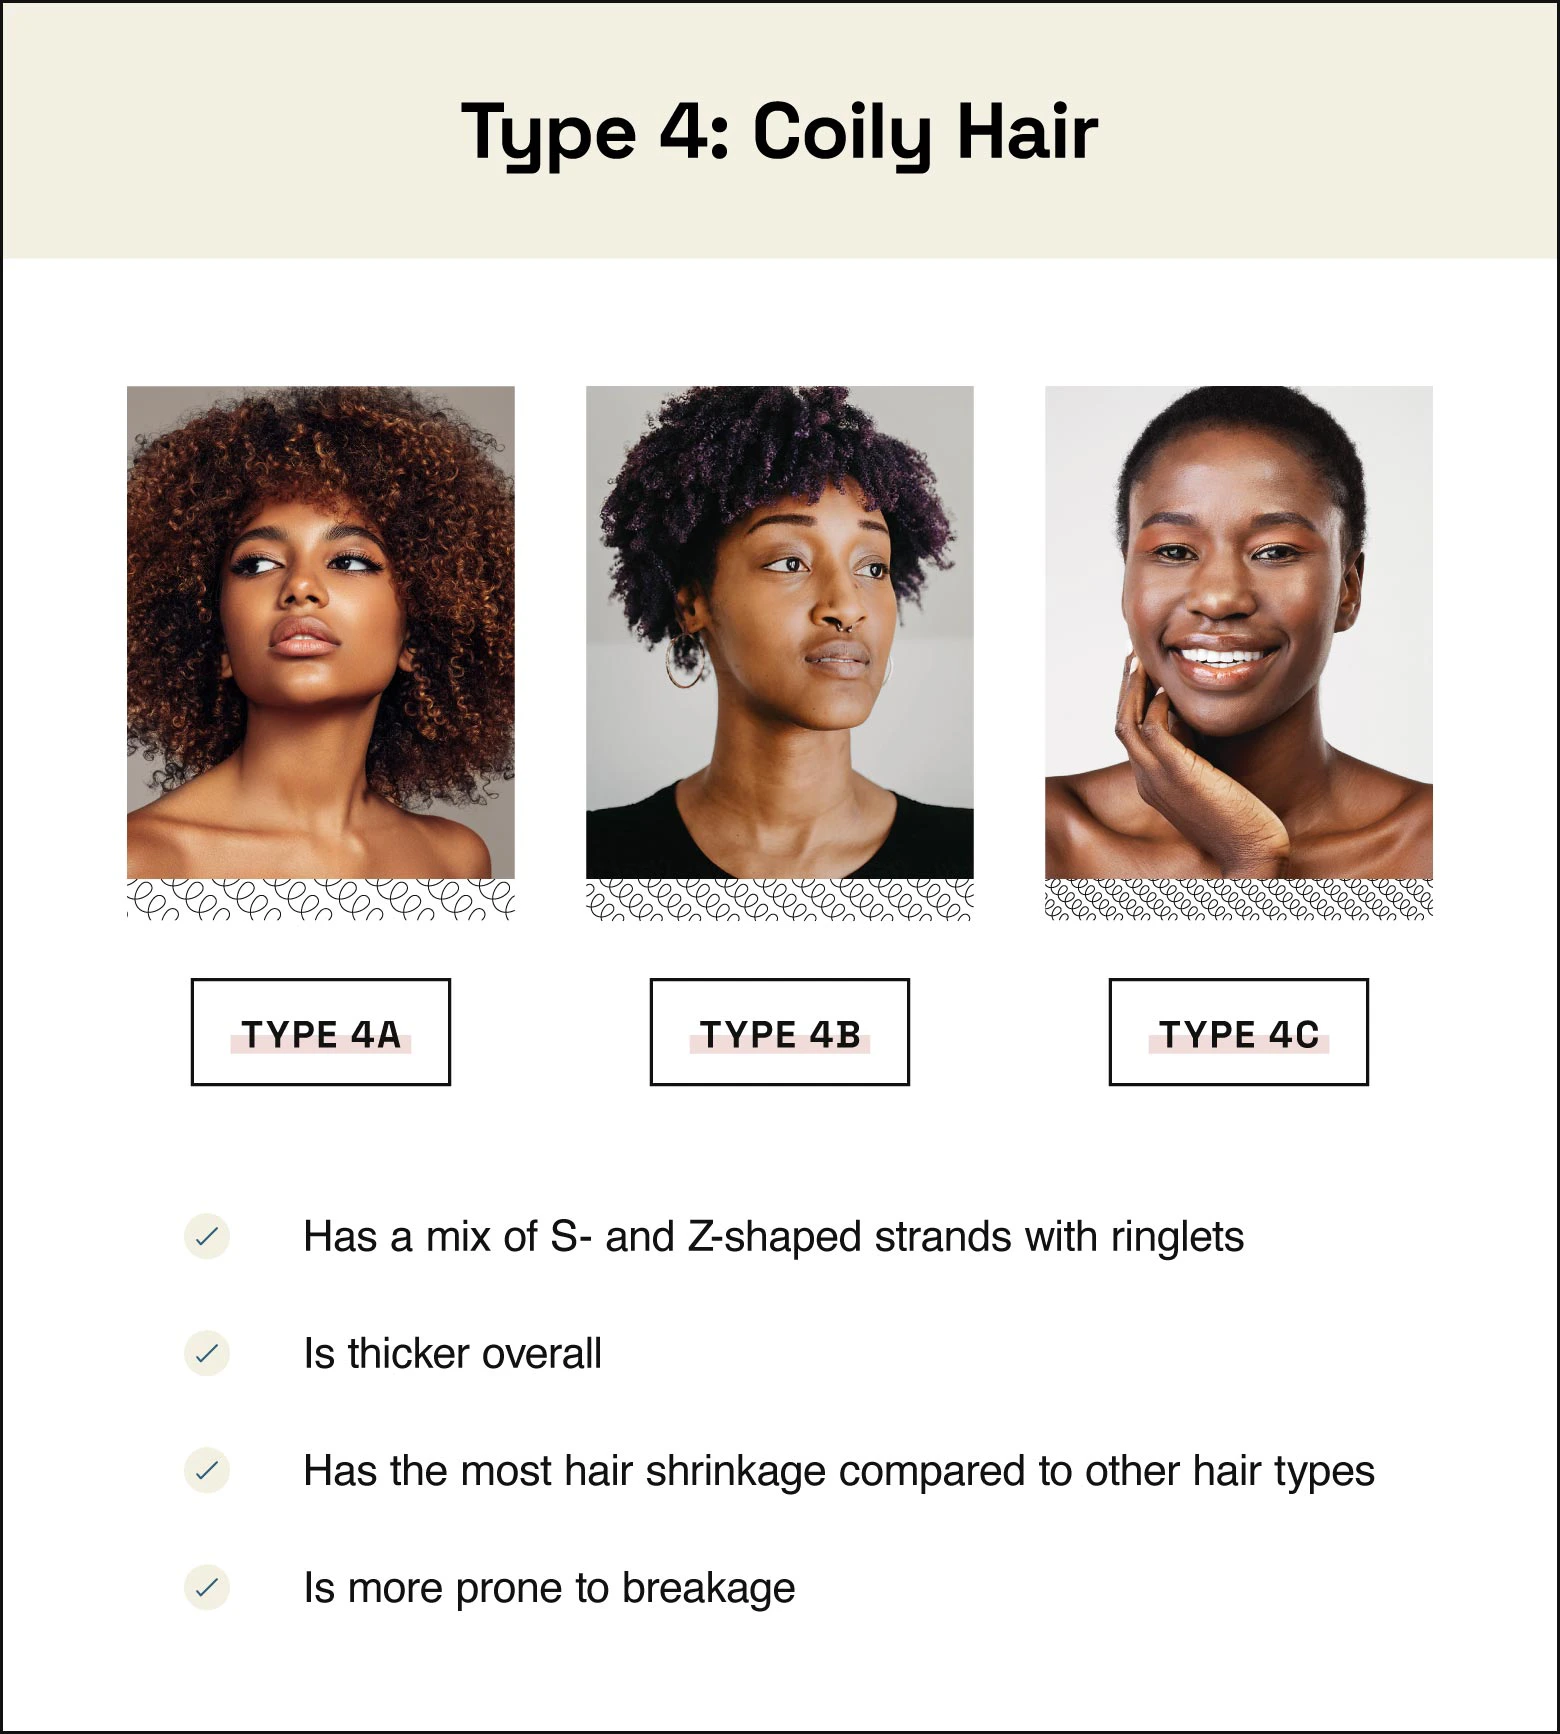 Type 4 hair is coily, has a mix of s- and z-shaped strands, is thicker overall, has more shrinkage than other hair types, and is most prone to breakage.